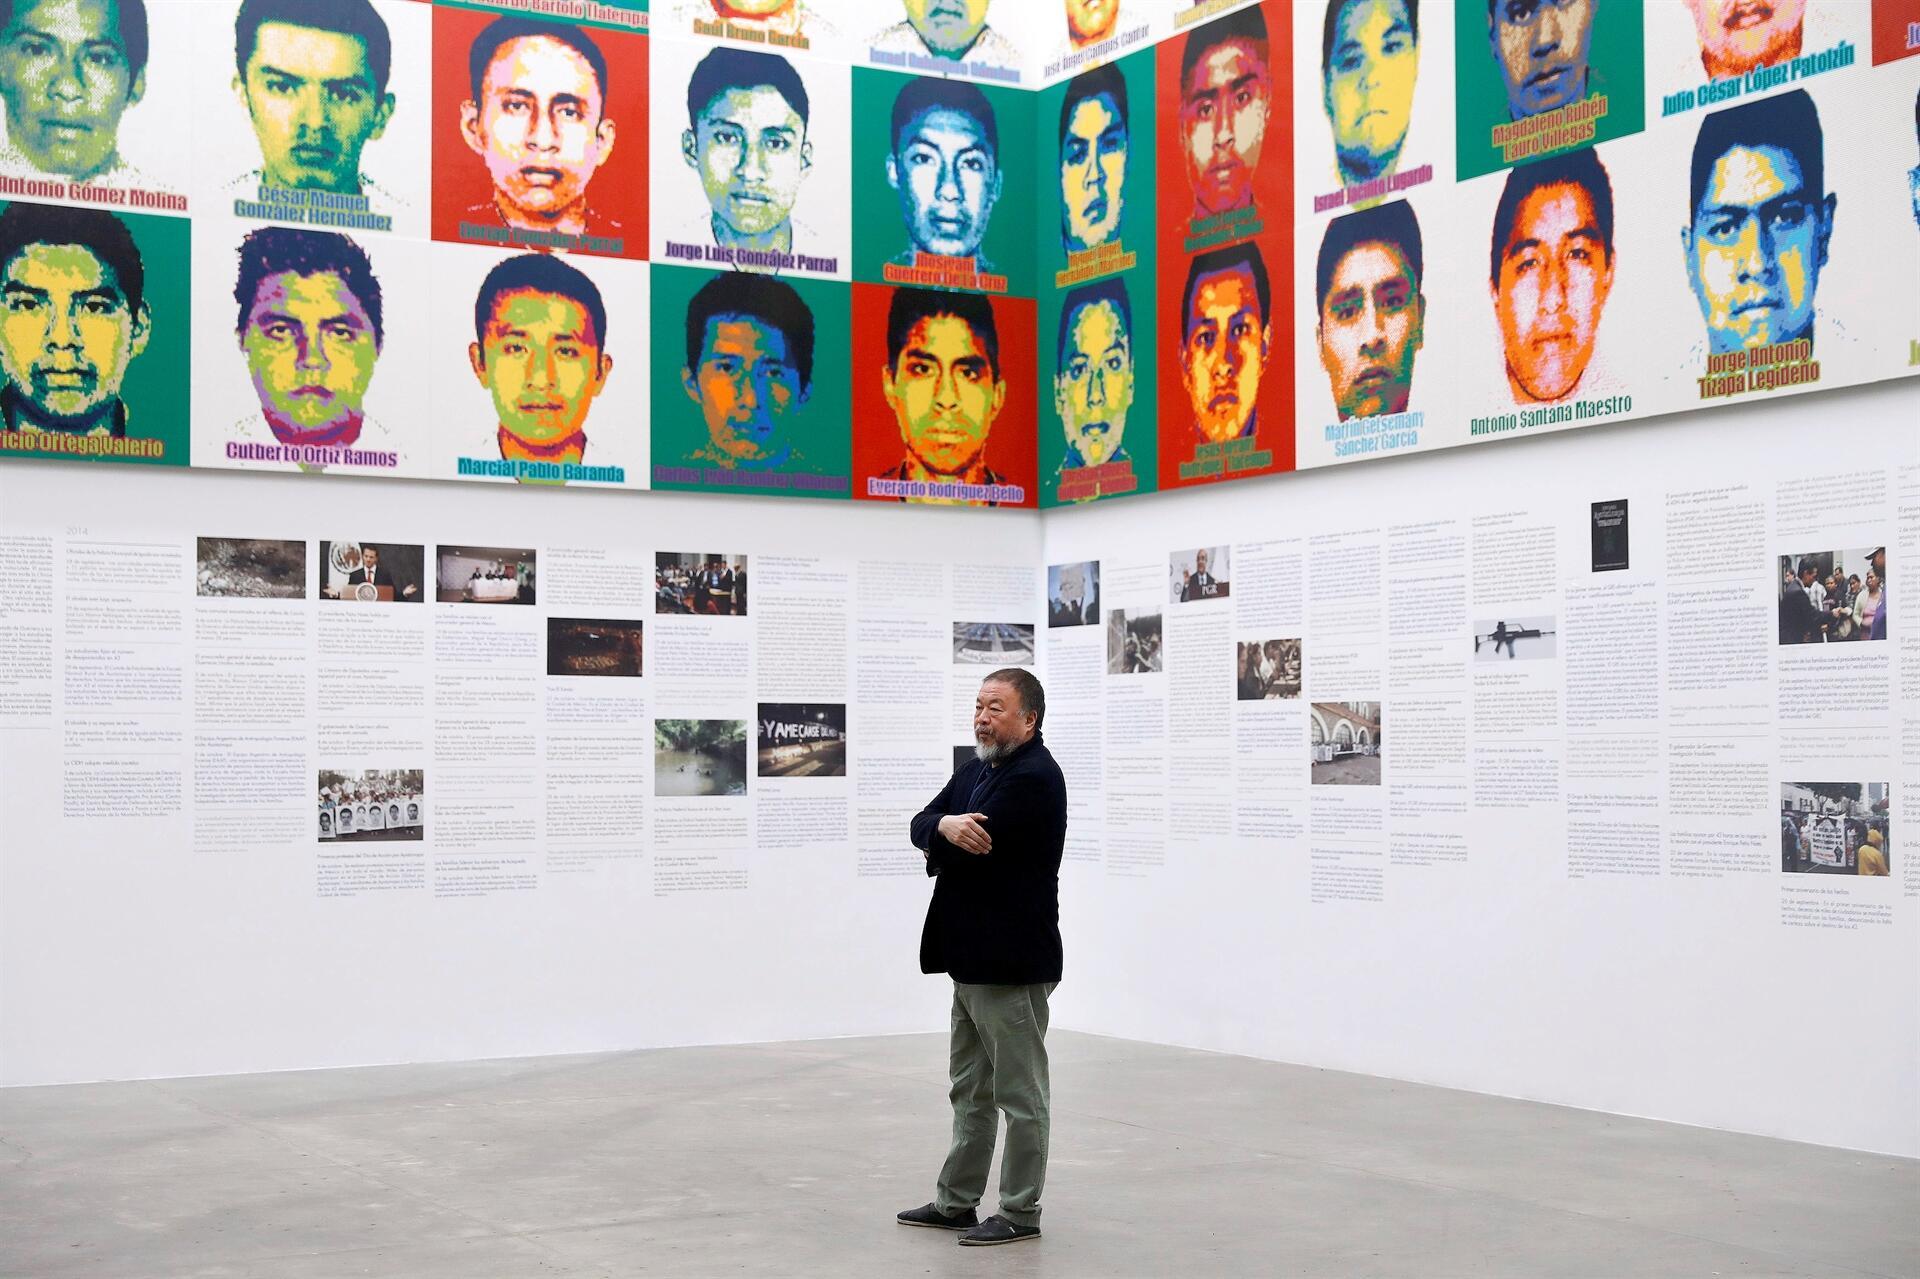 Fradrage Do fællesskab Artist Ai Weiwei takes aim at state violence in Mexico with Legos